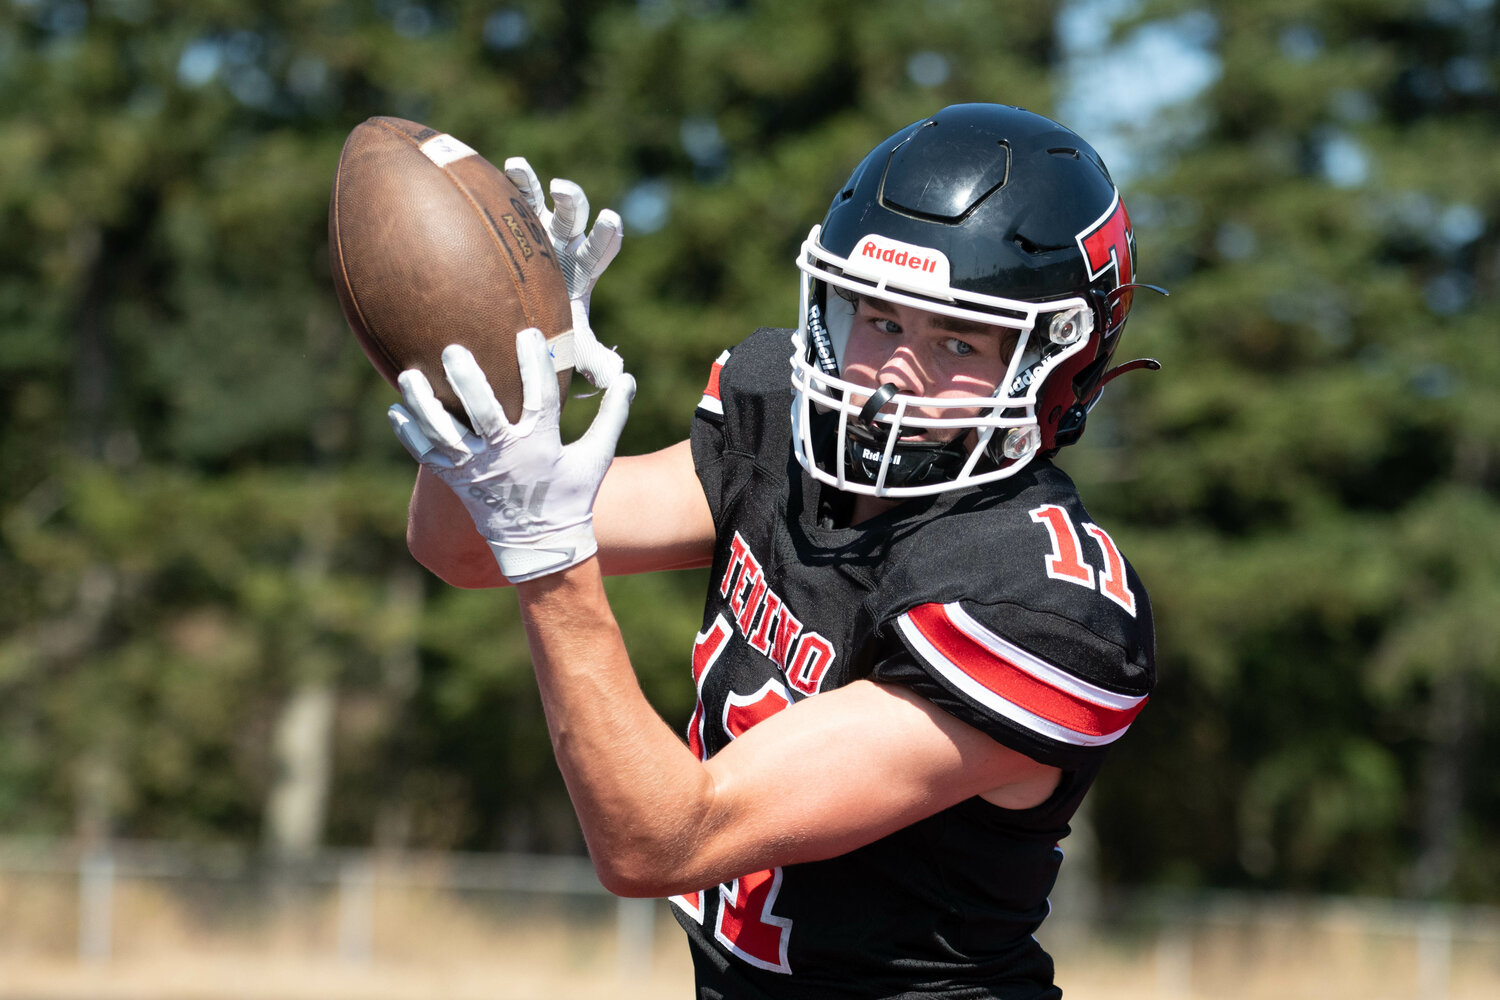 Jack Burkhardt comes down with a touchdown reception in the first half of Tenino's 34-32 loss to Zillah on Sept. 9.